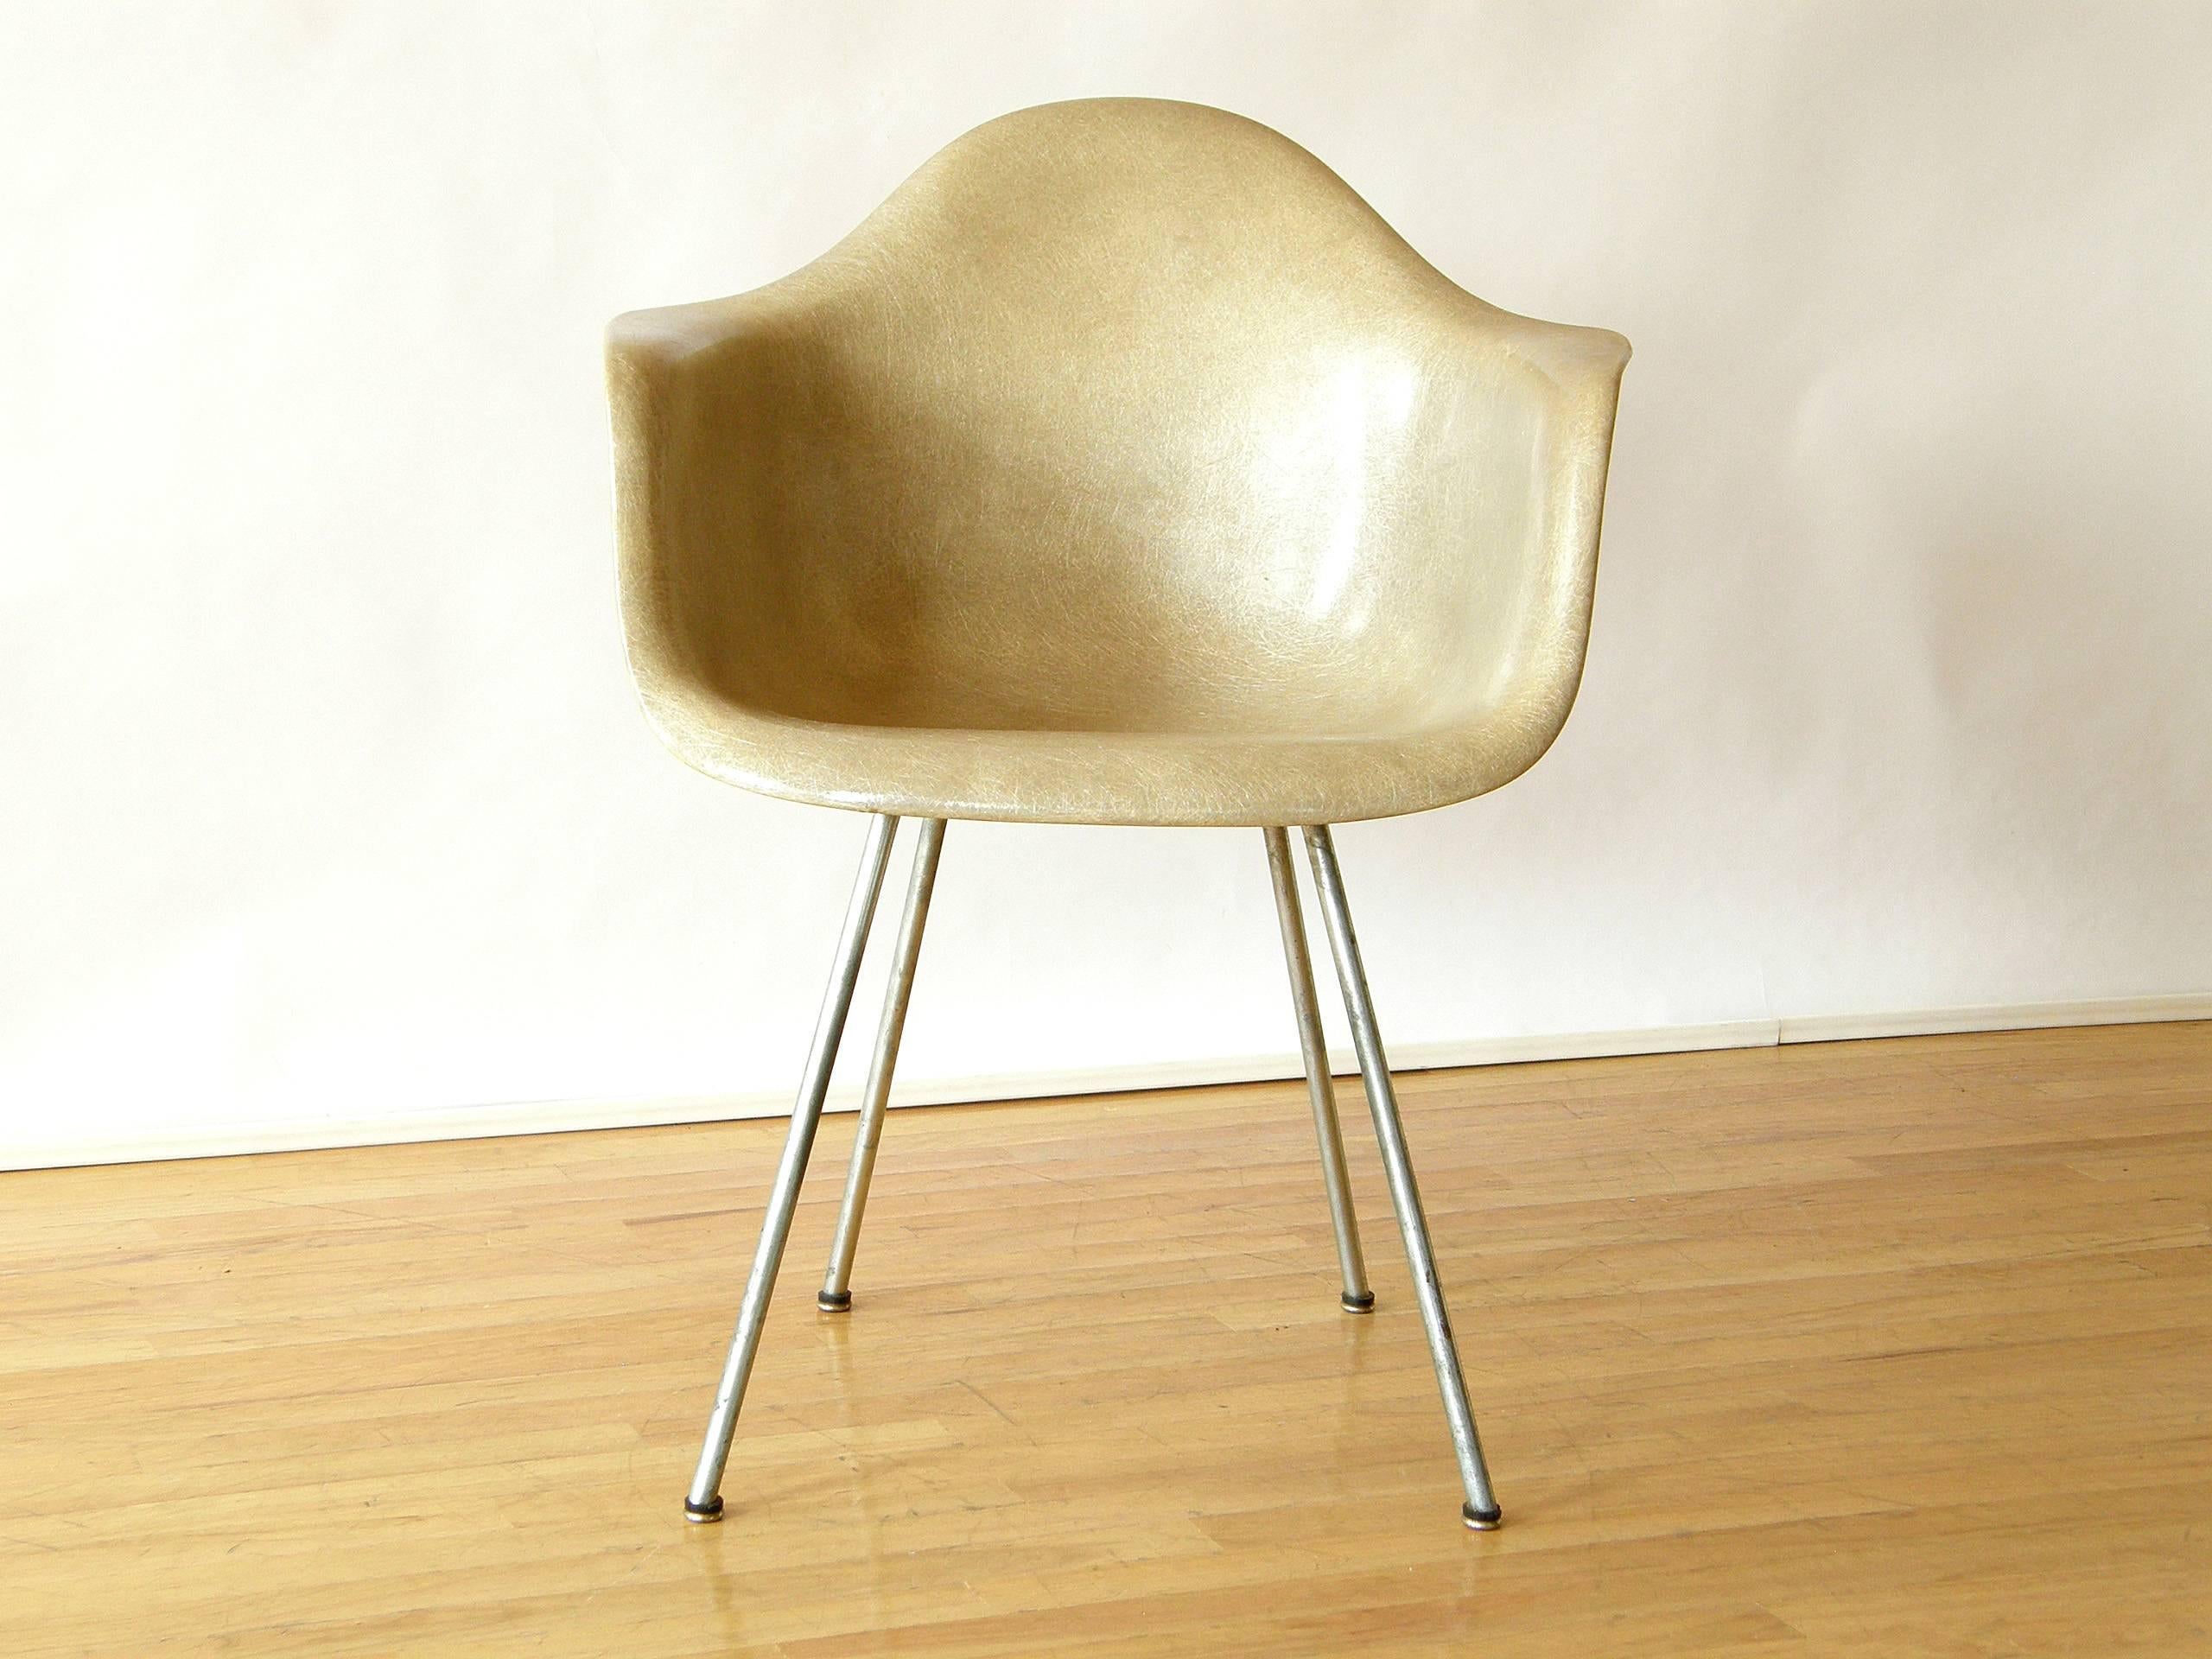 Early production fiberglass armchair by Charles and Ray Eames with 